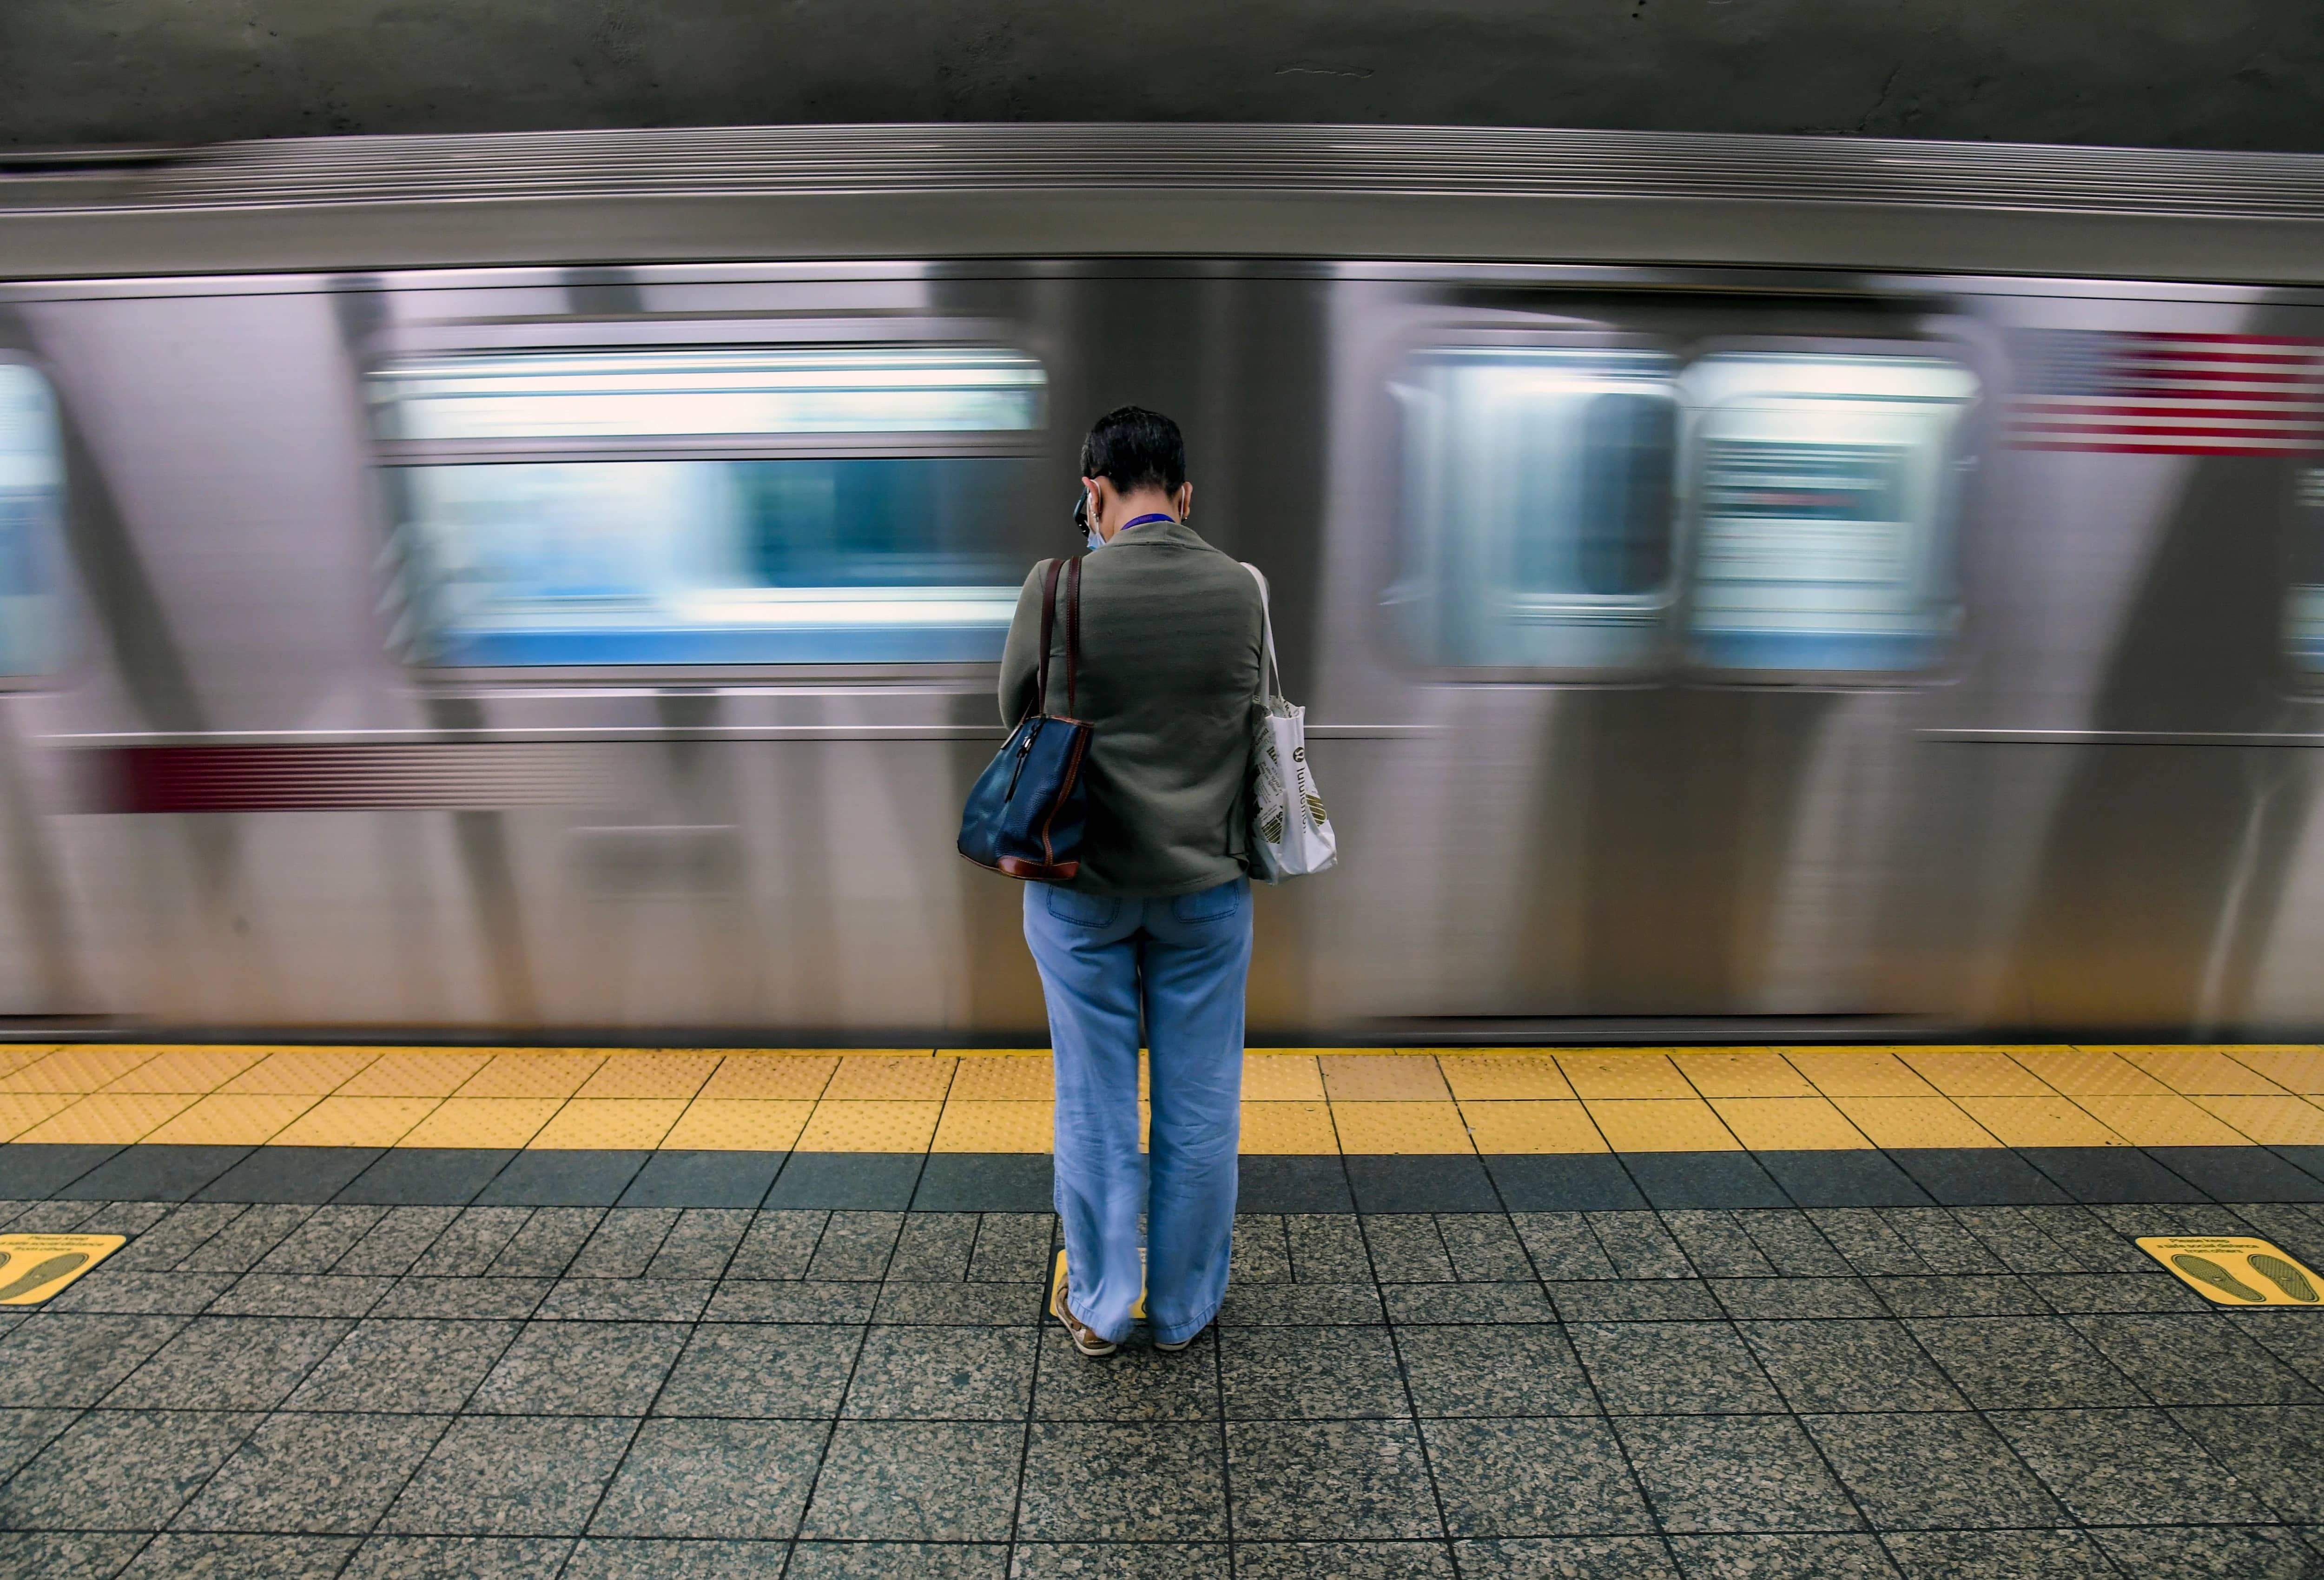 A person in a sage-green jacket and jeans stands on a subway station platform. An arriving train is visible in the background, blurred because of the motion.